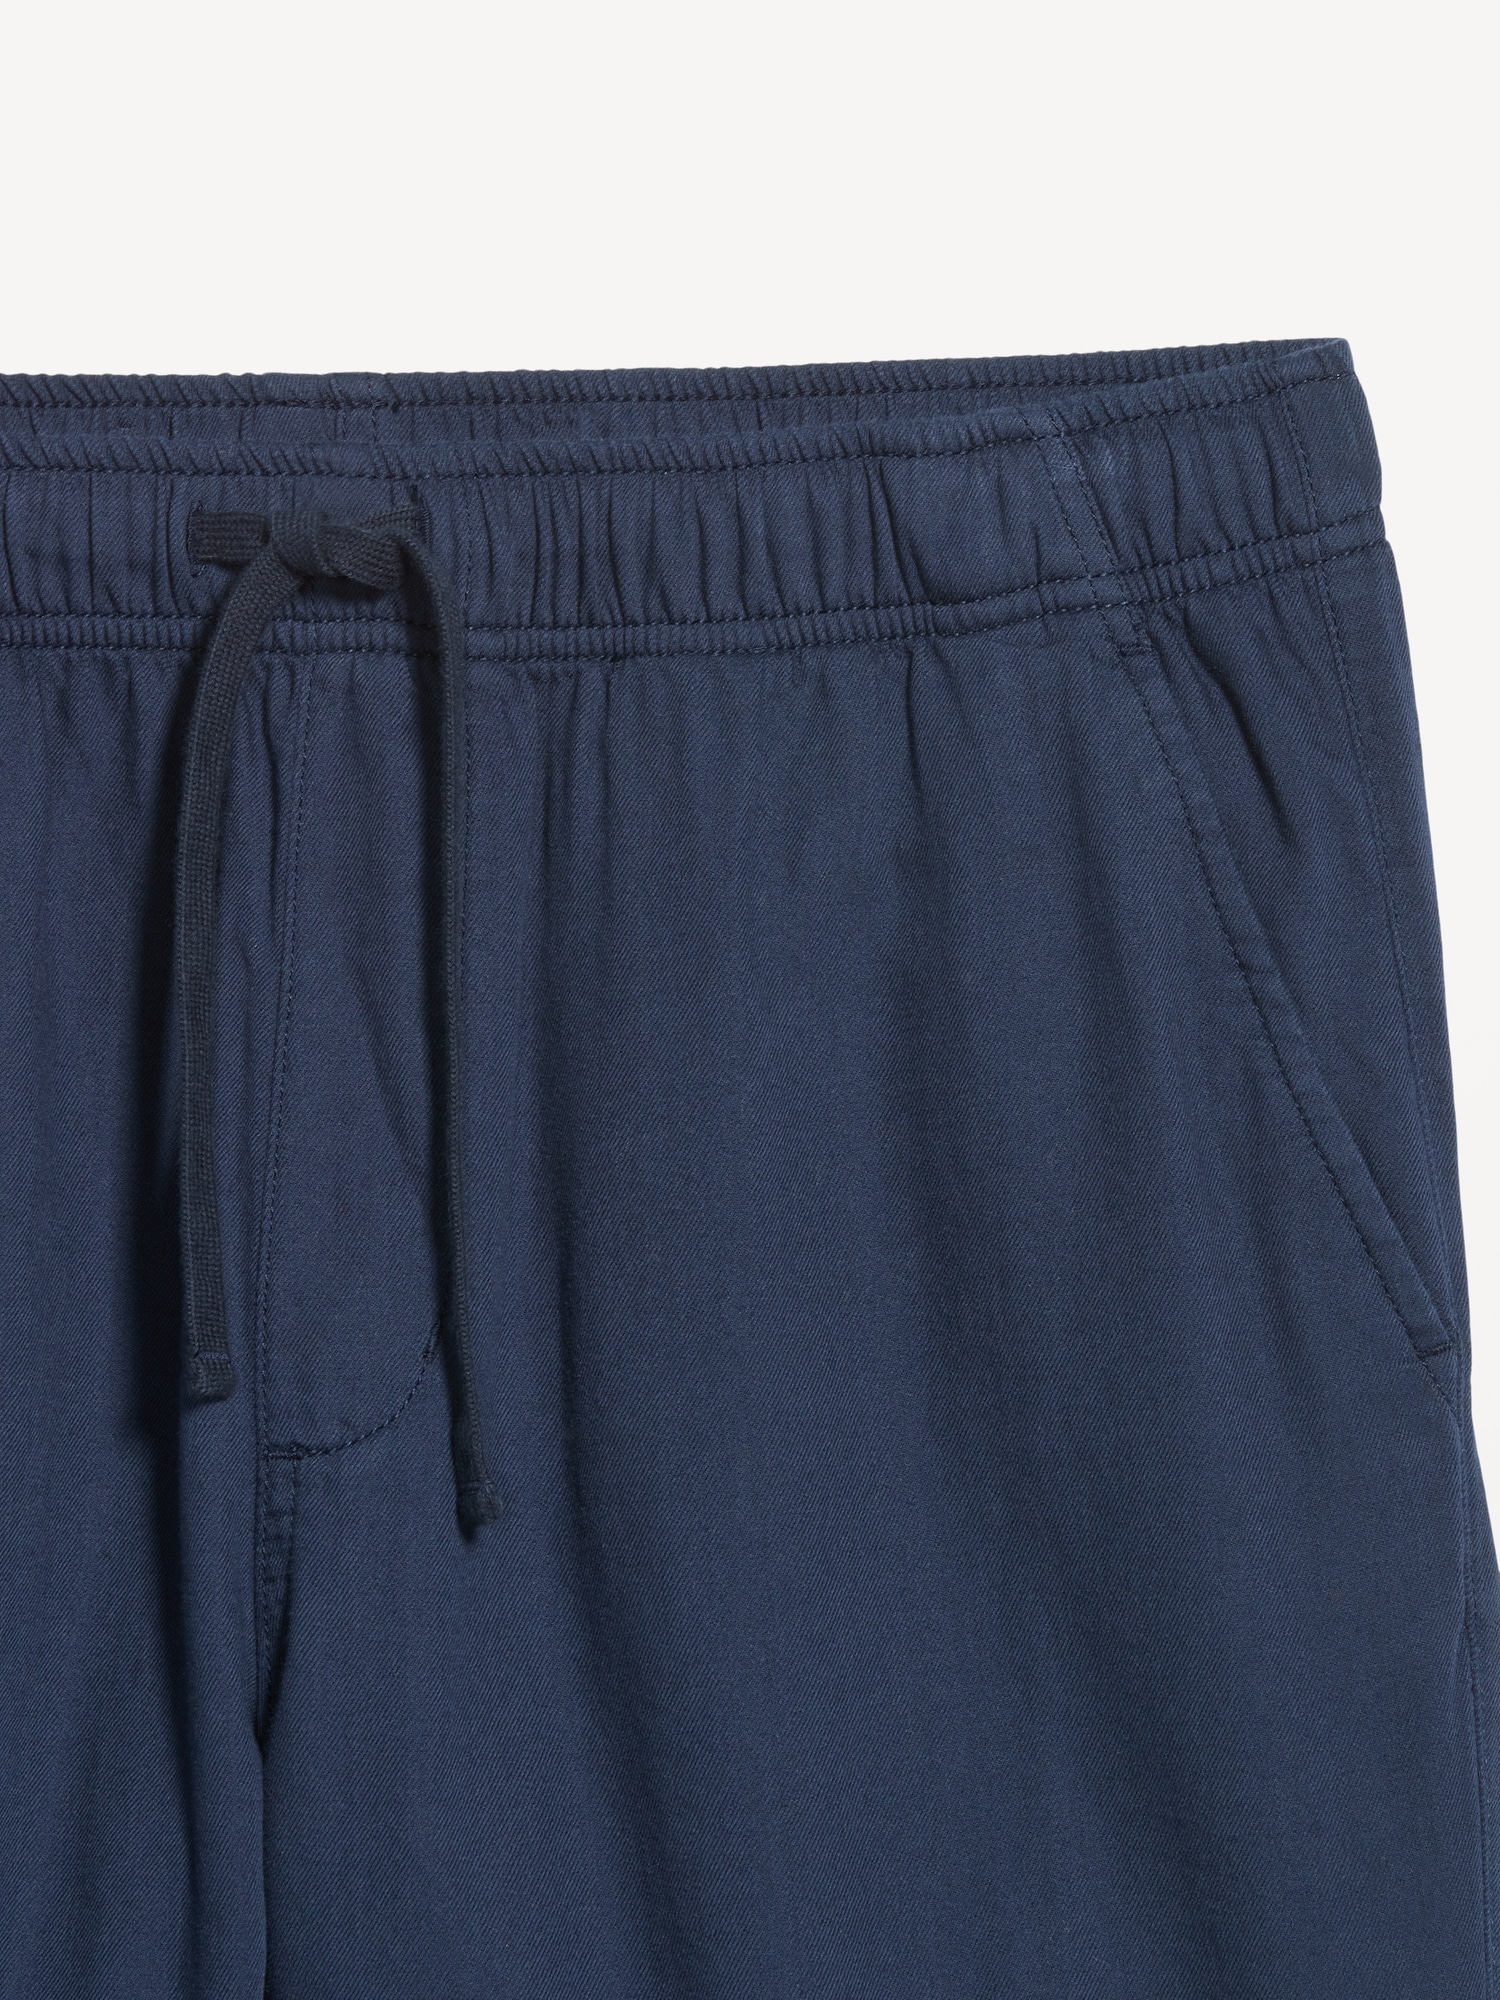 Utility Jogger Shorts for Men -- 7-inch inseam | Old Navy